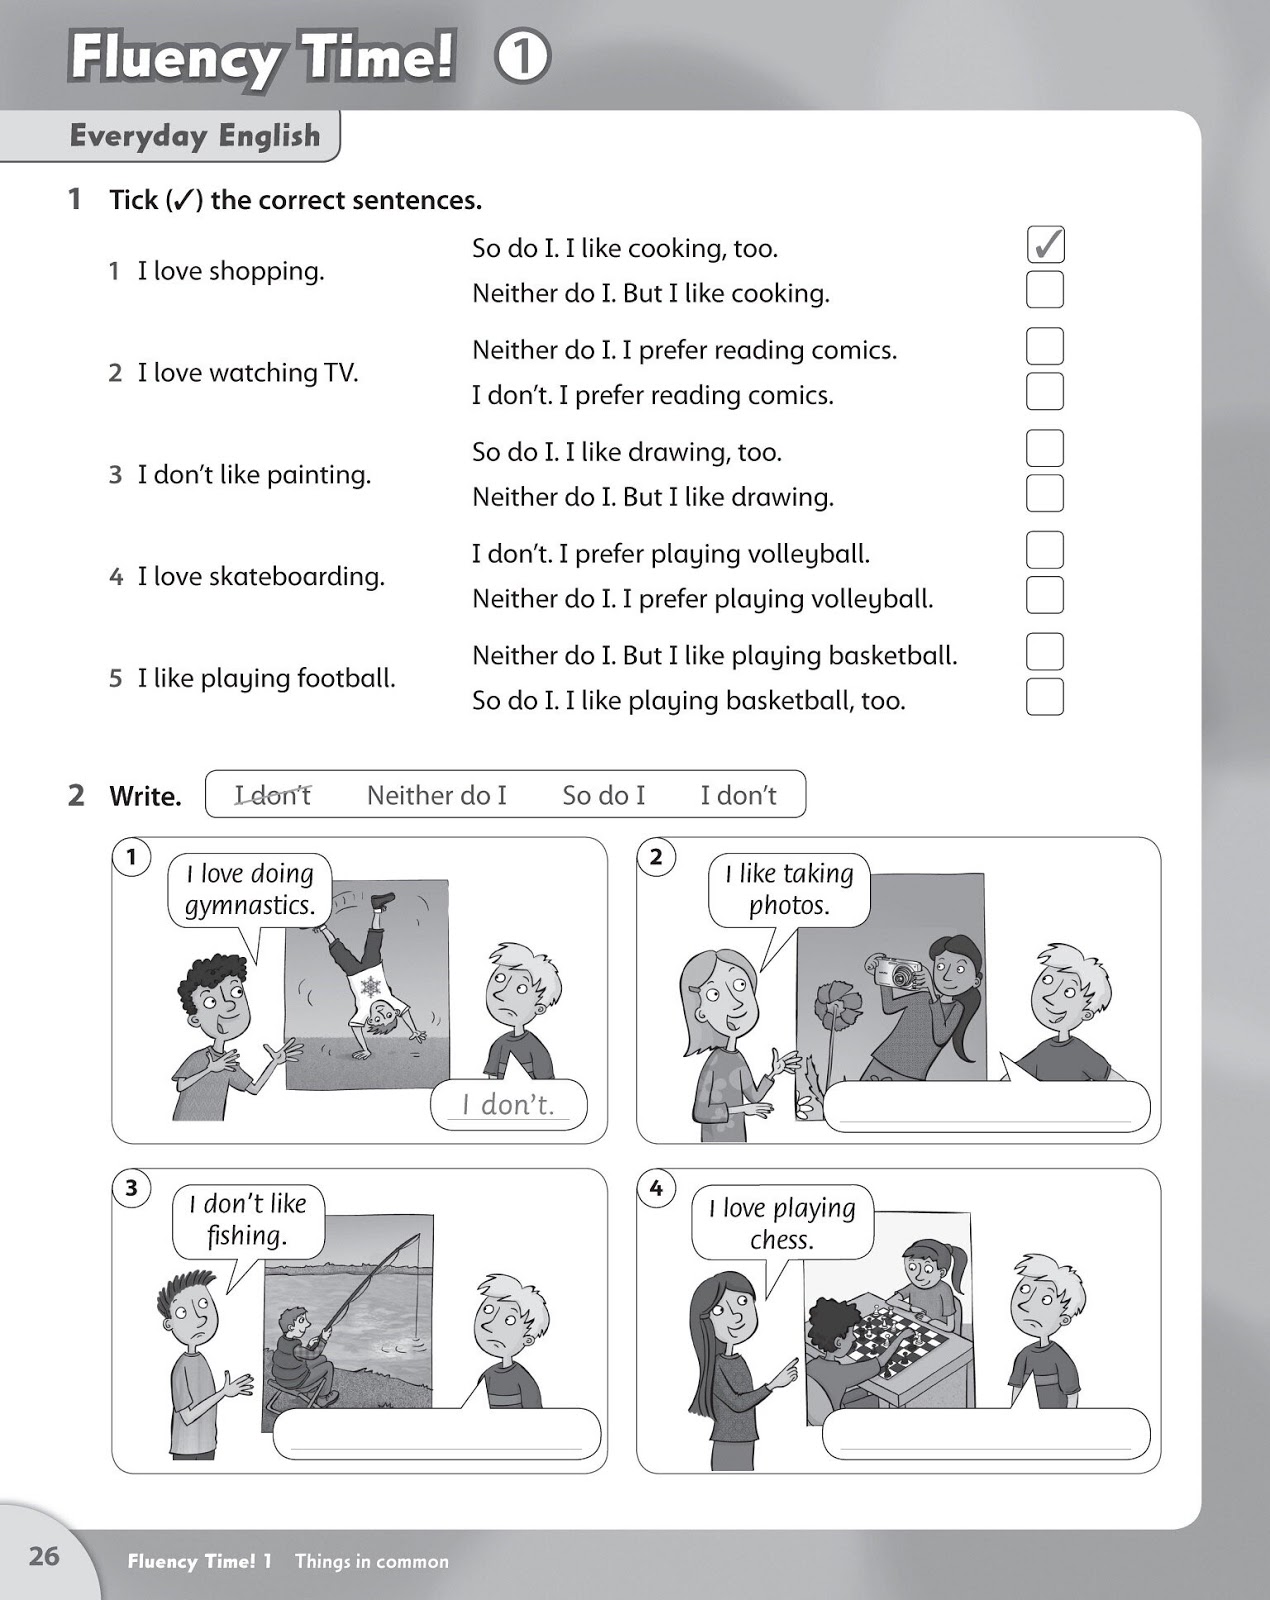 Английский язык friends 3 workbook. Тетрадь Family and friends 3. Family and friends 1 Fluency time 2. Гдз Family and friends 2 Workbook 3 класс. Family and friends 3 Workbook ответы 4.